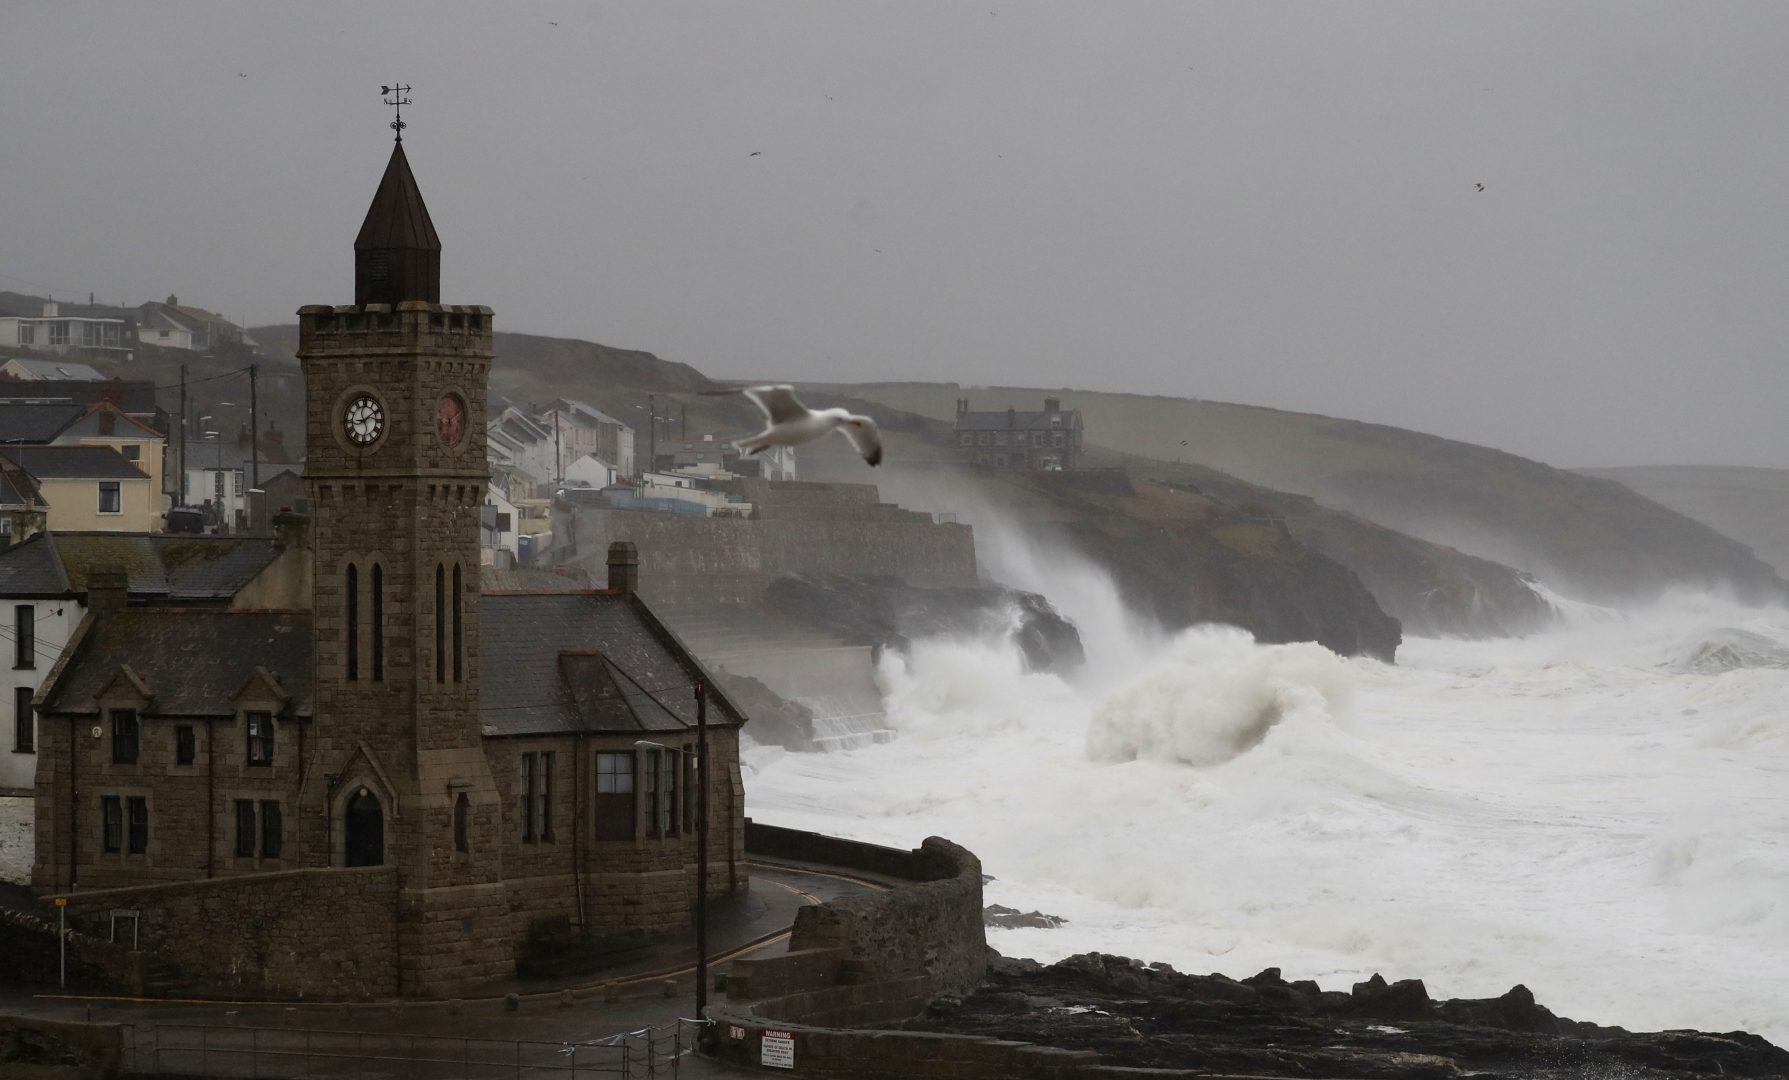 Powerful waves break on the shoreline around the small port of Porthleven, south west England, Sunday, Feb. 16, 2020. Storm Dennis roared across Britain on Sunday, lashing towns and cities with high winds and dumping so much rain that authorities urged residents to protect themselves from 